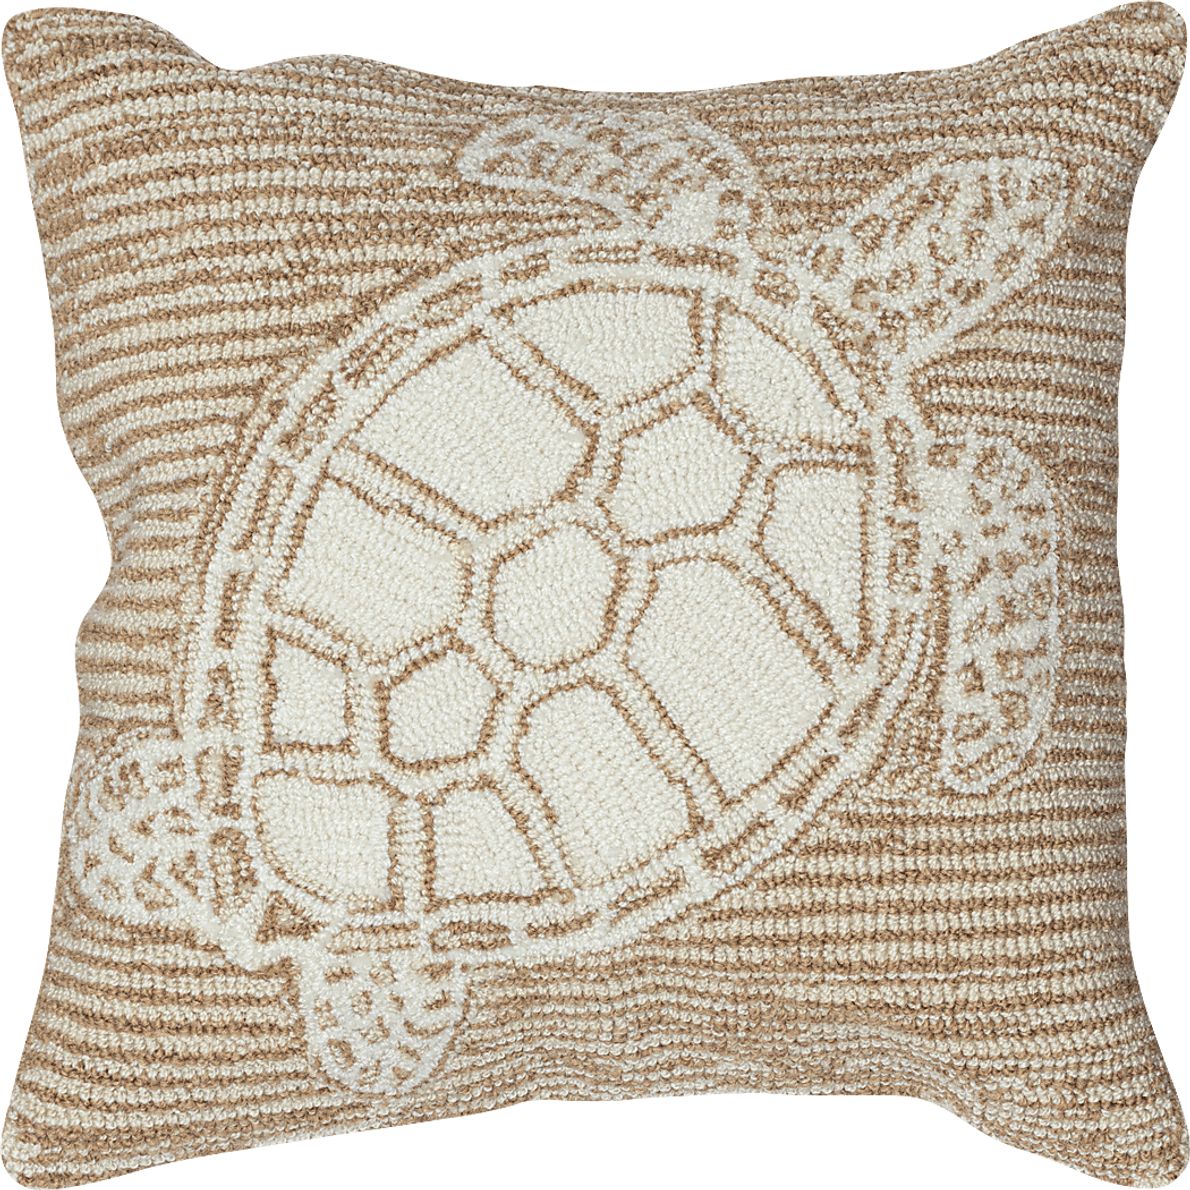 Turtle Cove Neutral Indoor/Outdoor Accent Pillow